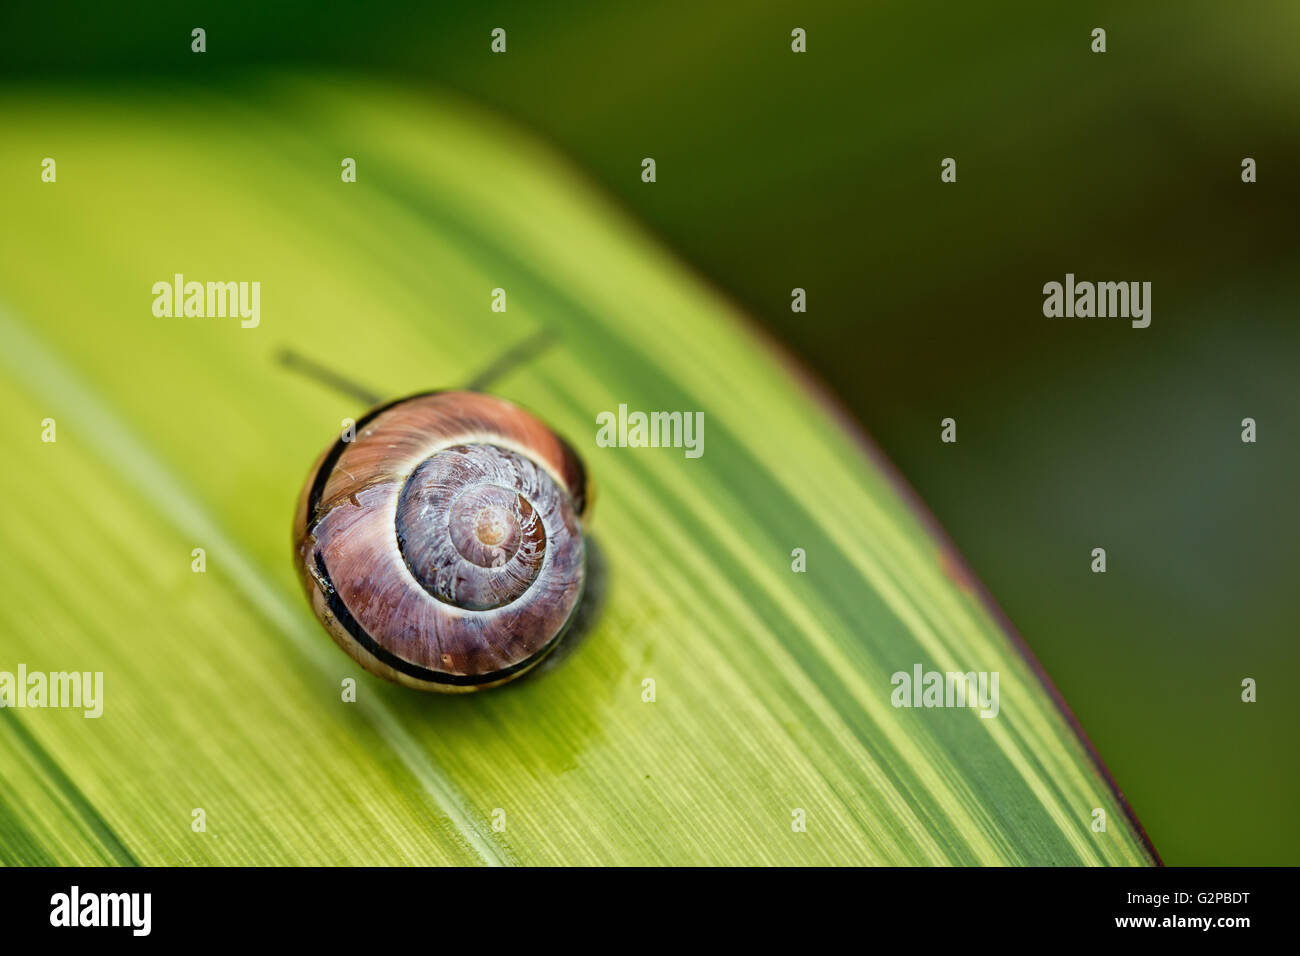 Small banded garden snail in summer on green leaf Stock Photo